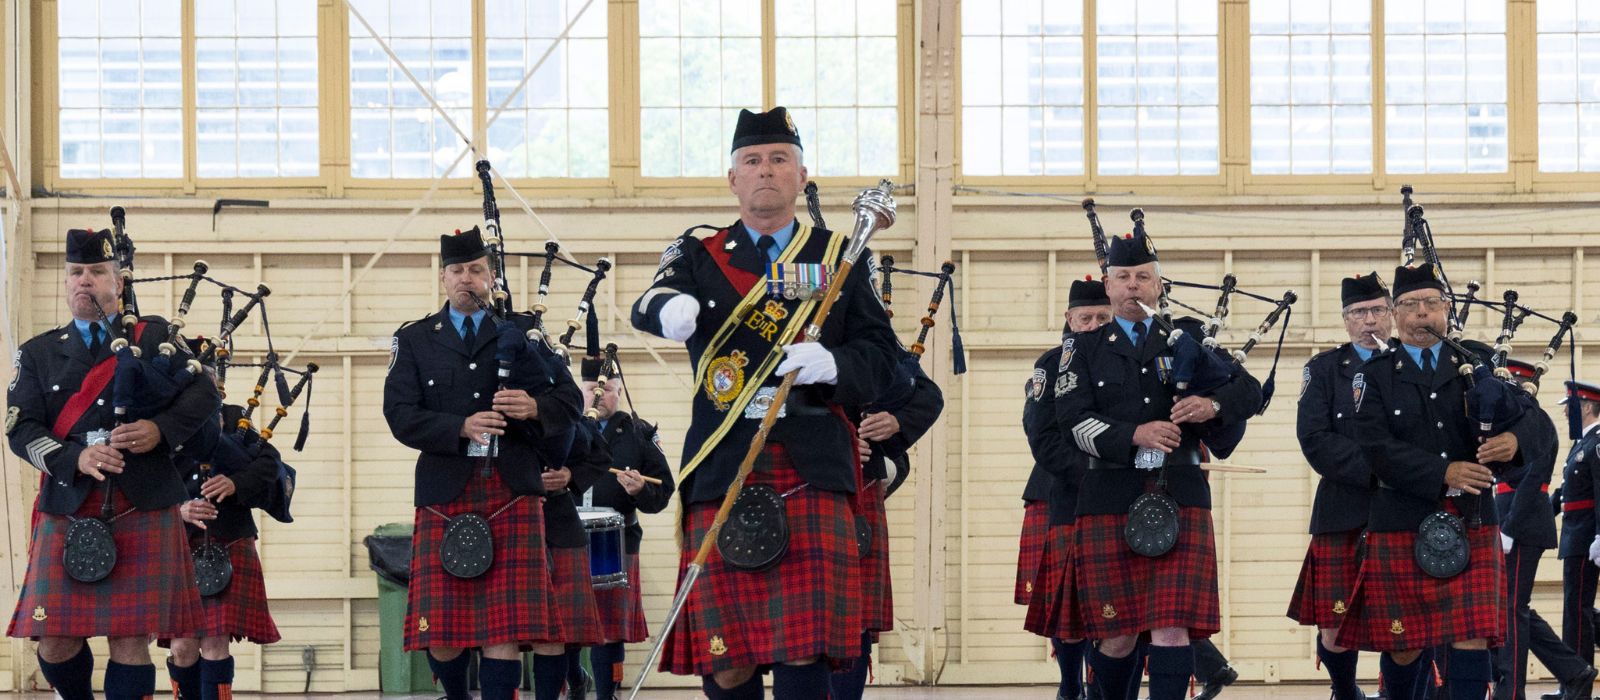 Ottawa Police Pipe Band marching and playing their instruments at an indoor event.